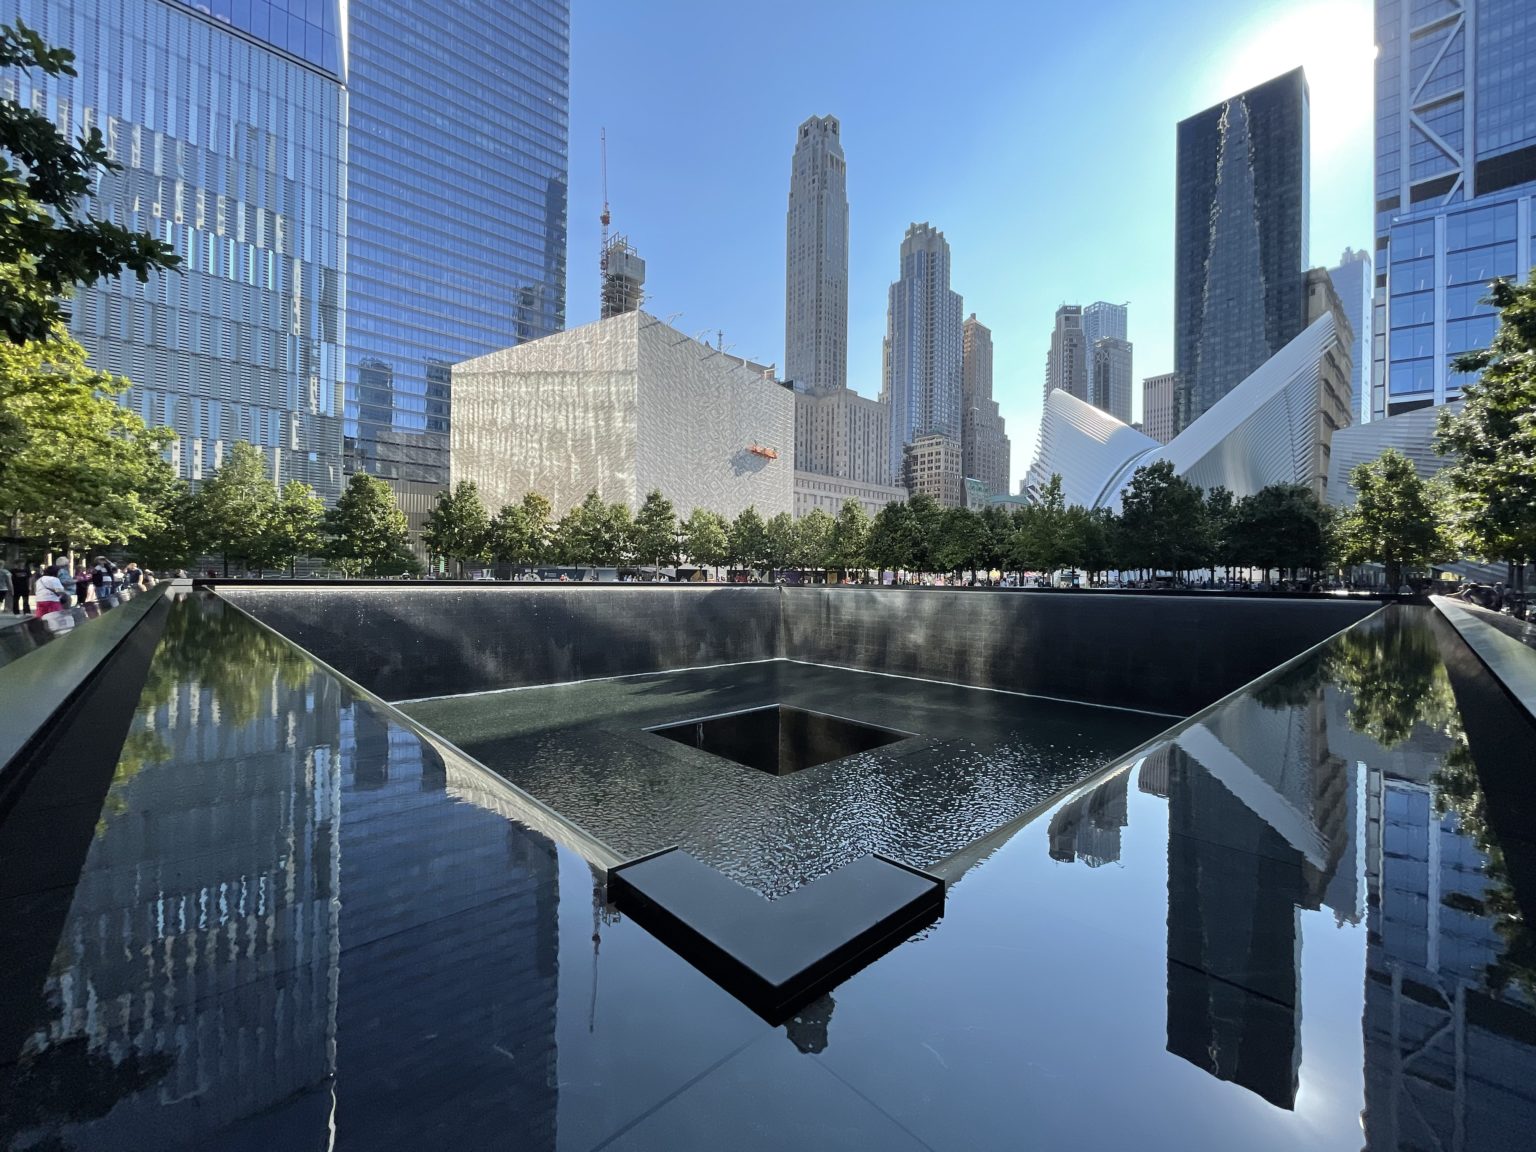 View of Perelman Performing Arts Center from 9/11 Memorial & Museum, Photo by Michael Young